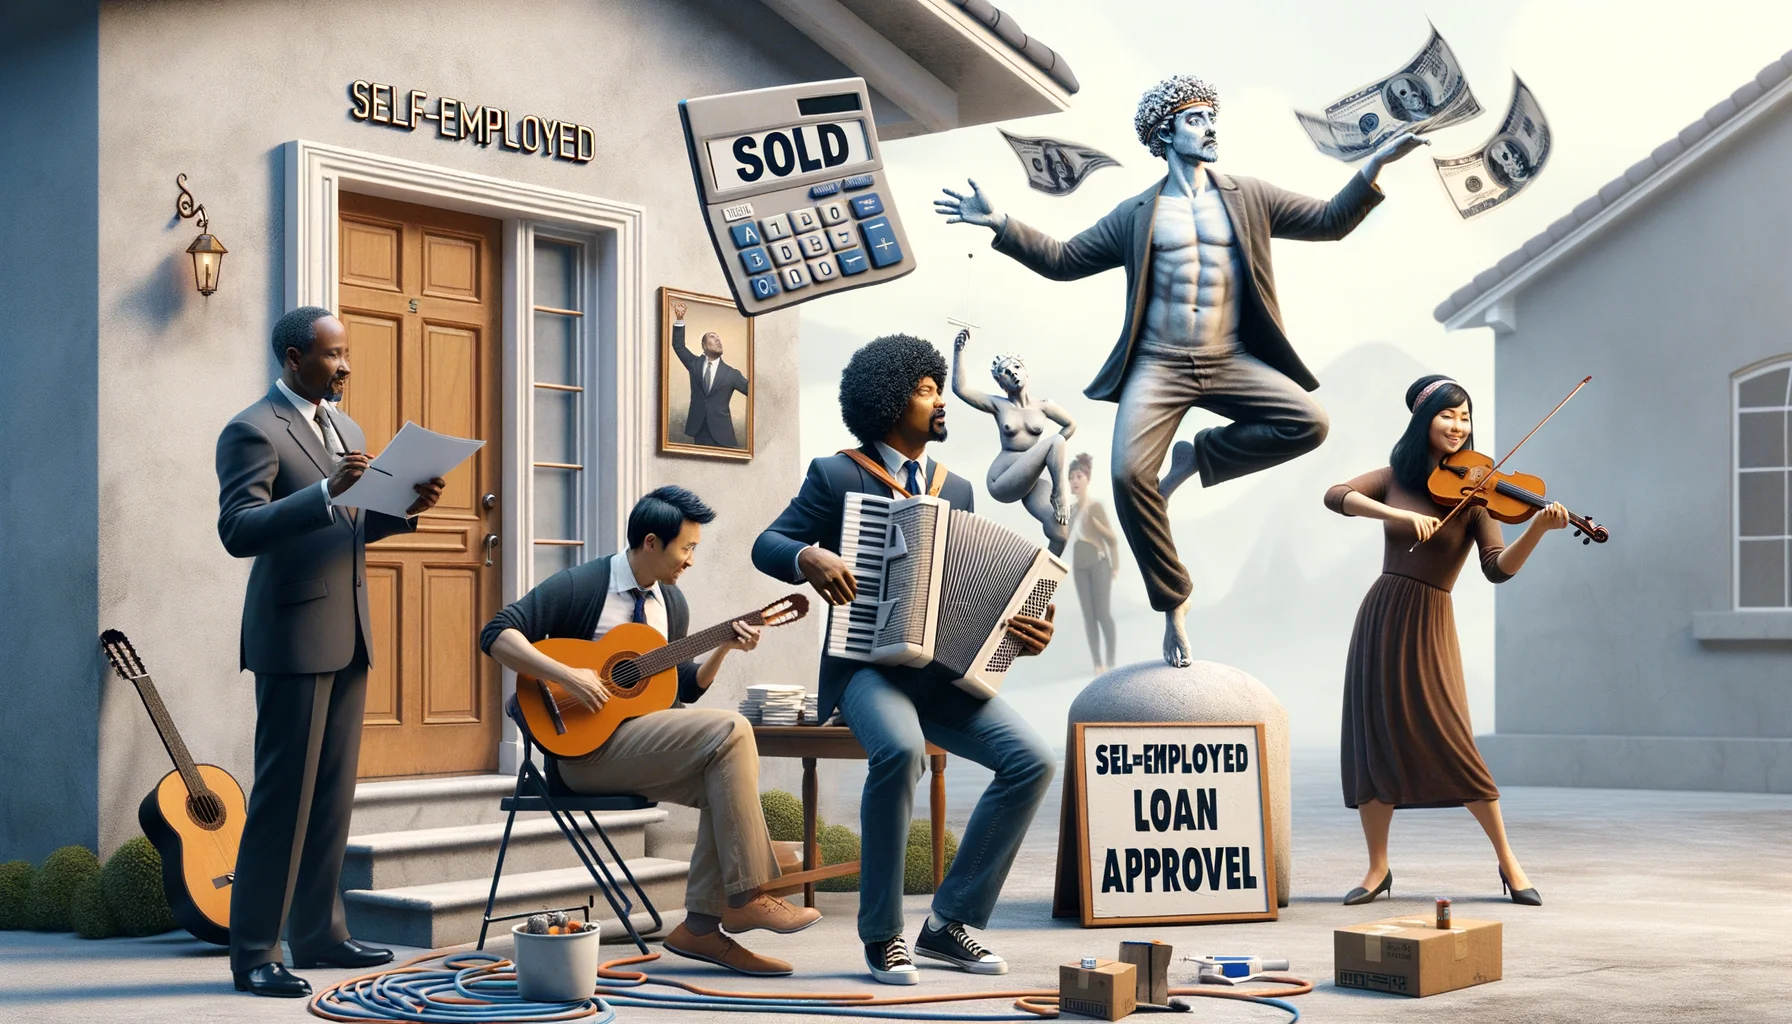 Create a hilariously realistic scene highlighting the experience of purchasing a home for self-employed individuals. It includes a diverse representation of people: an African male real estate agent with a comically oversized calculator, an Asian female bank representative with papers marked 'Self-Employed Loan Approval' flying around in the wind, and a White male self-employed artist, statue-like, balancing on one leg to hold a 'Sold' sign while simultaneously painting it with the other hand. Meanwhile, a Middle-Eastern woman musician plays a victory tune on a violin in the background. Reflect the ups, downs, and quirks in the home-buying process for self-employed individuals.